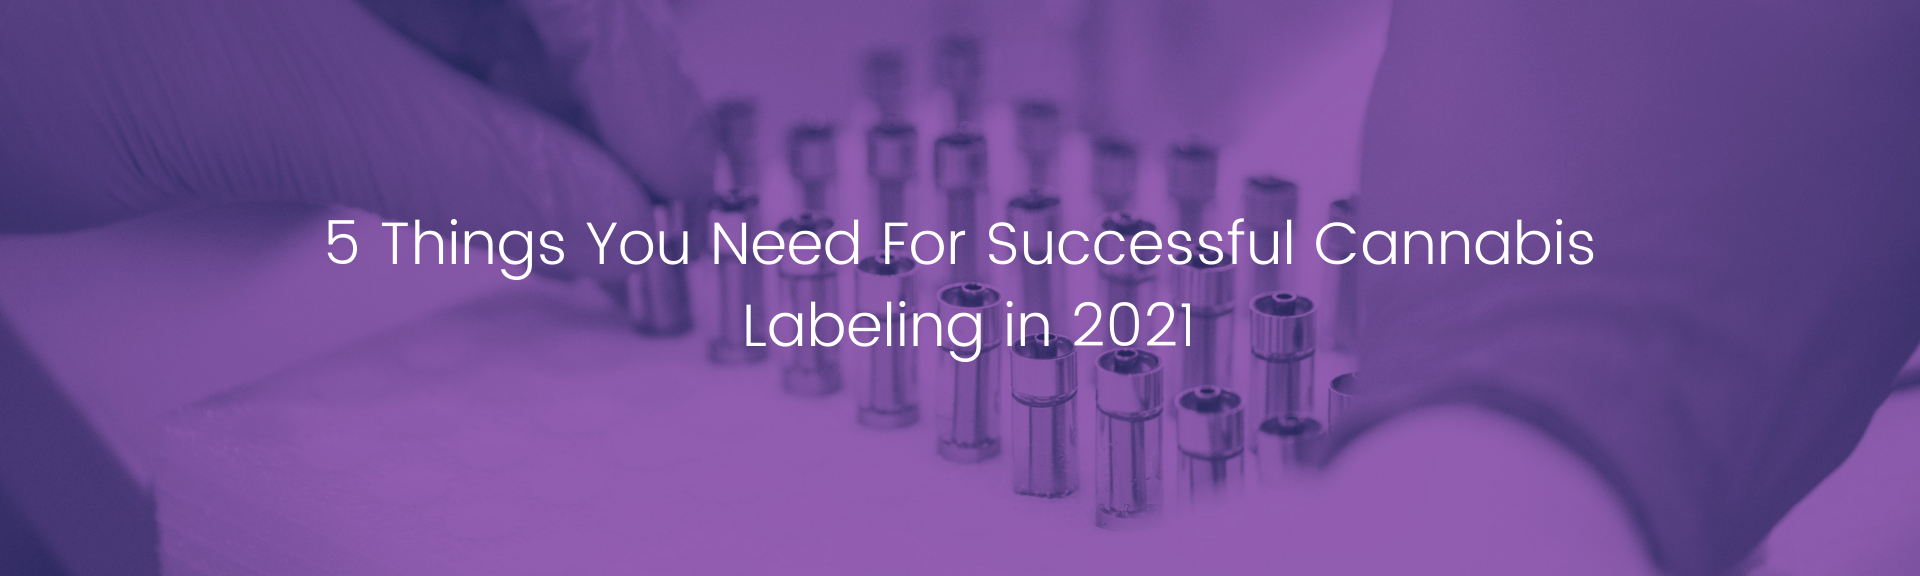 5 Things You Need For Successful Cannabis Labeling in 2021